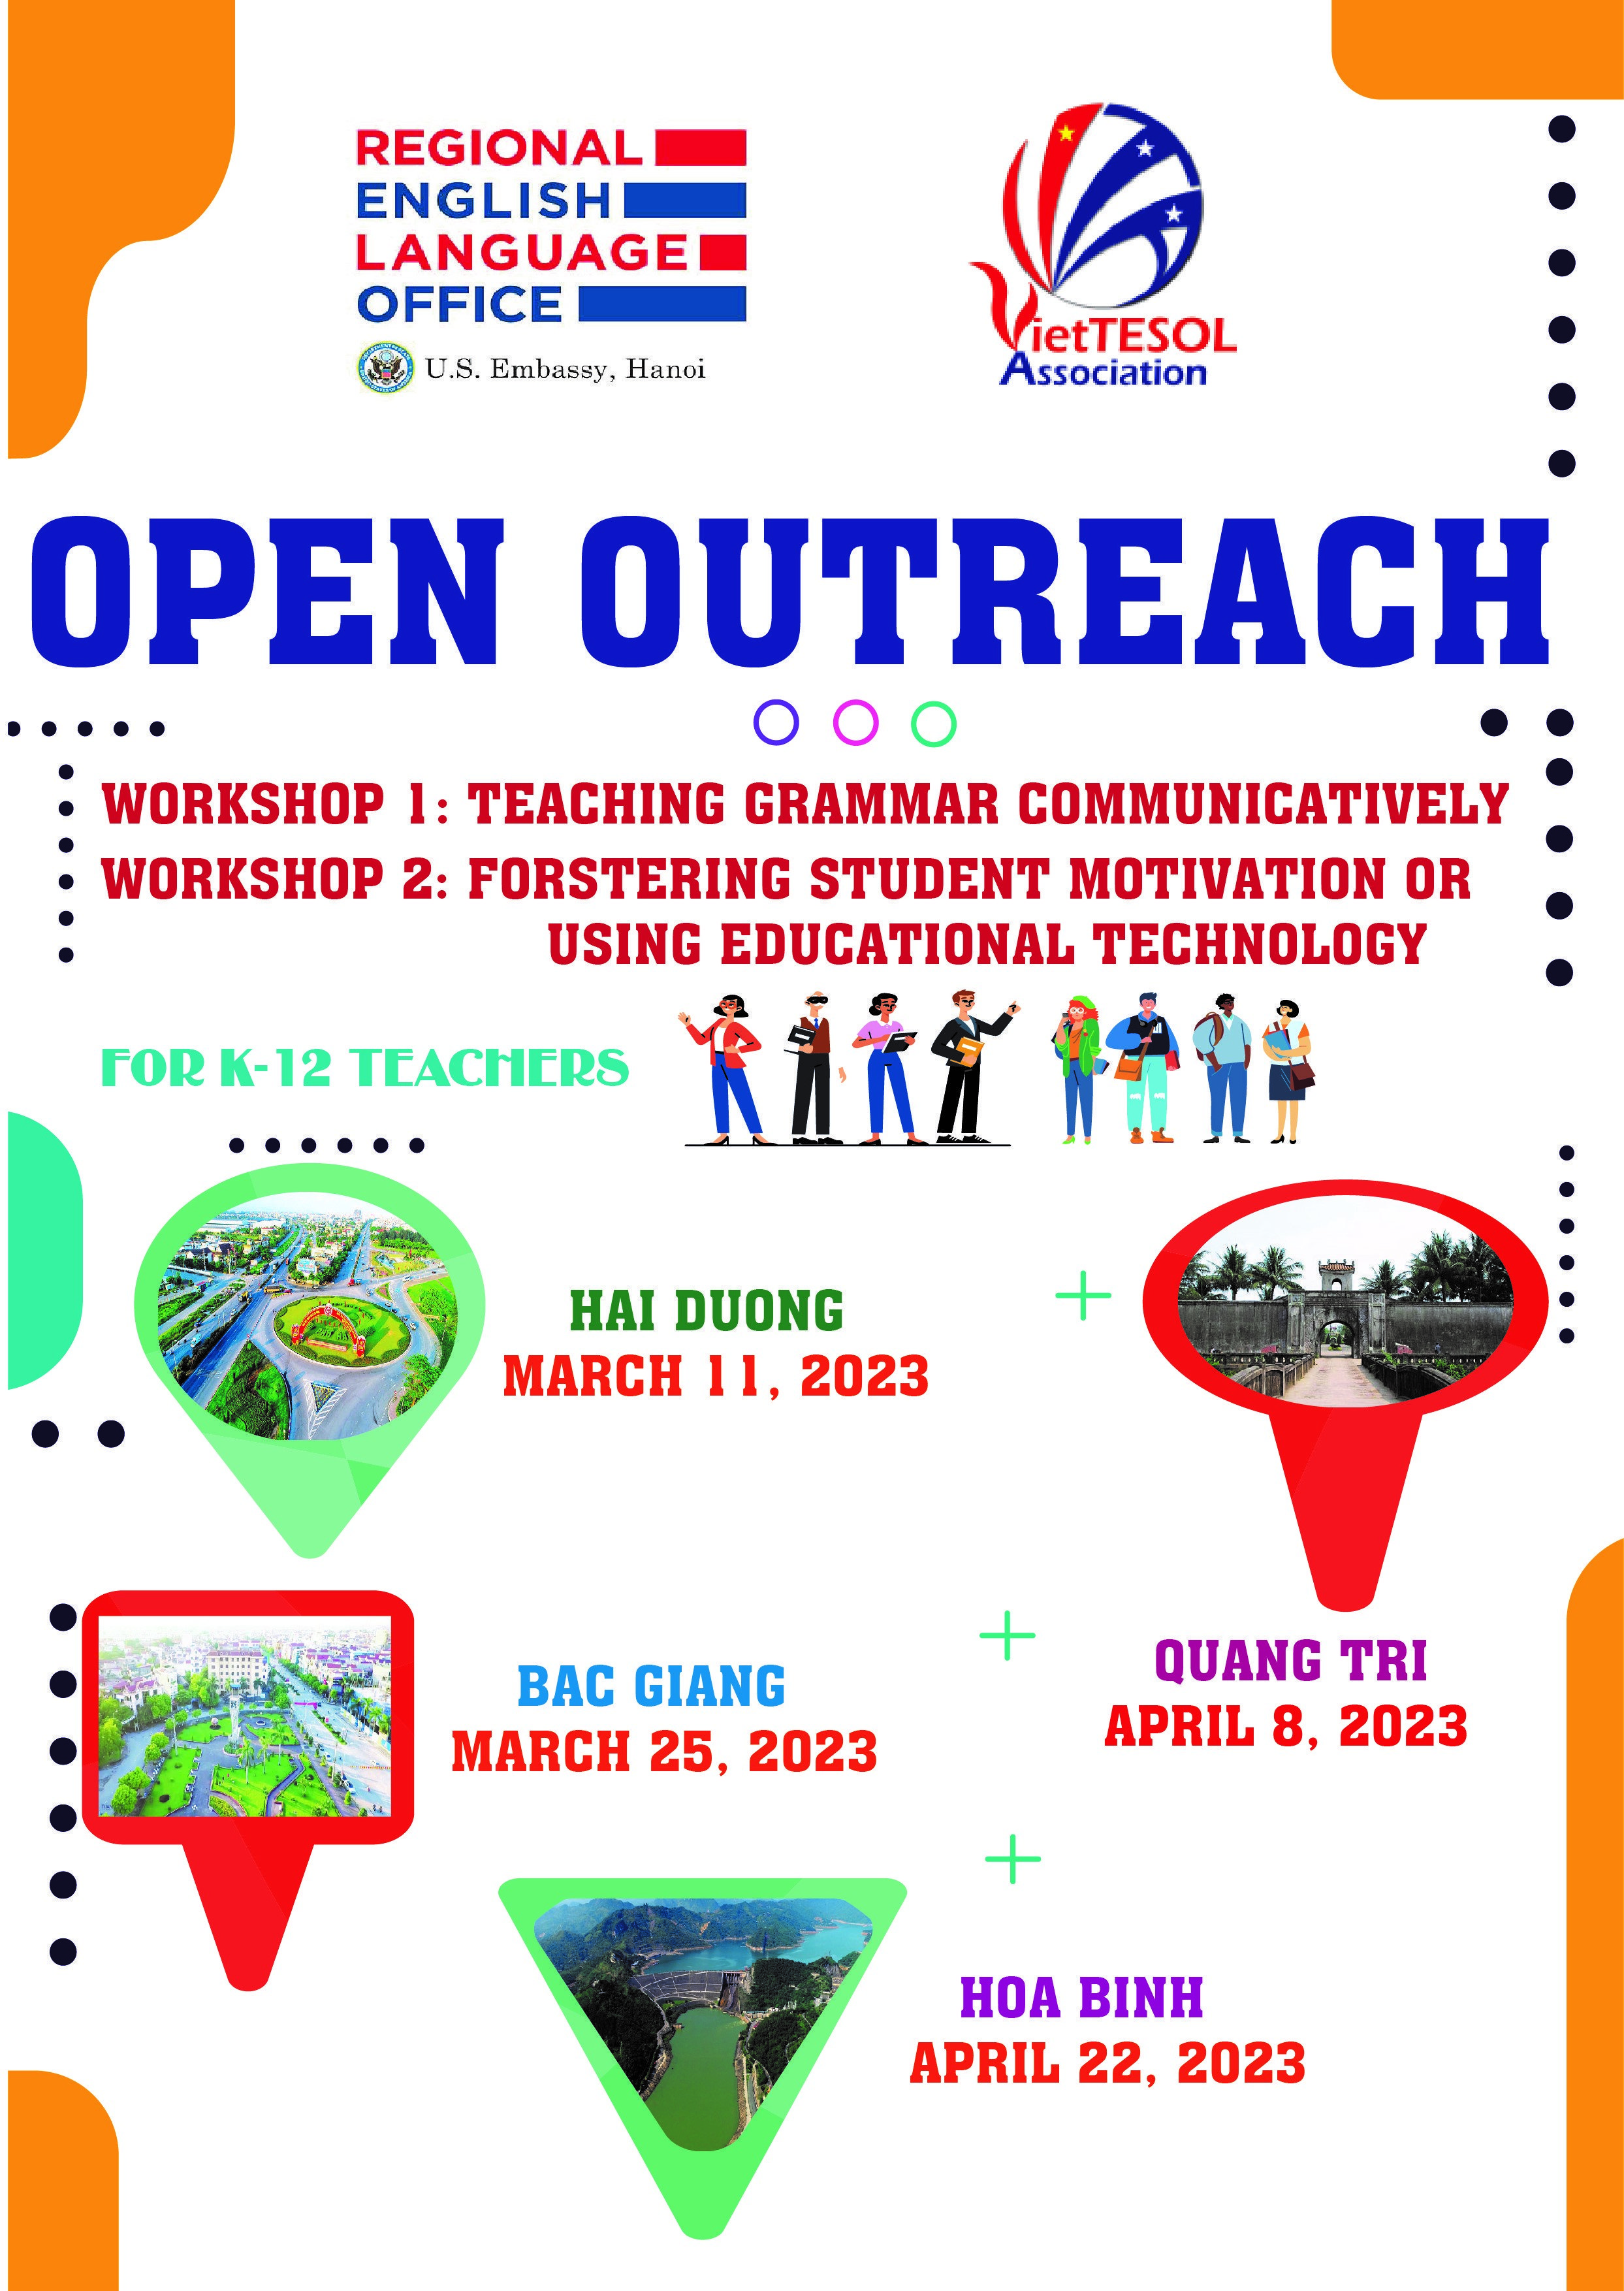 OPEN OUTREACH project